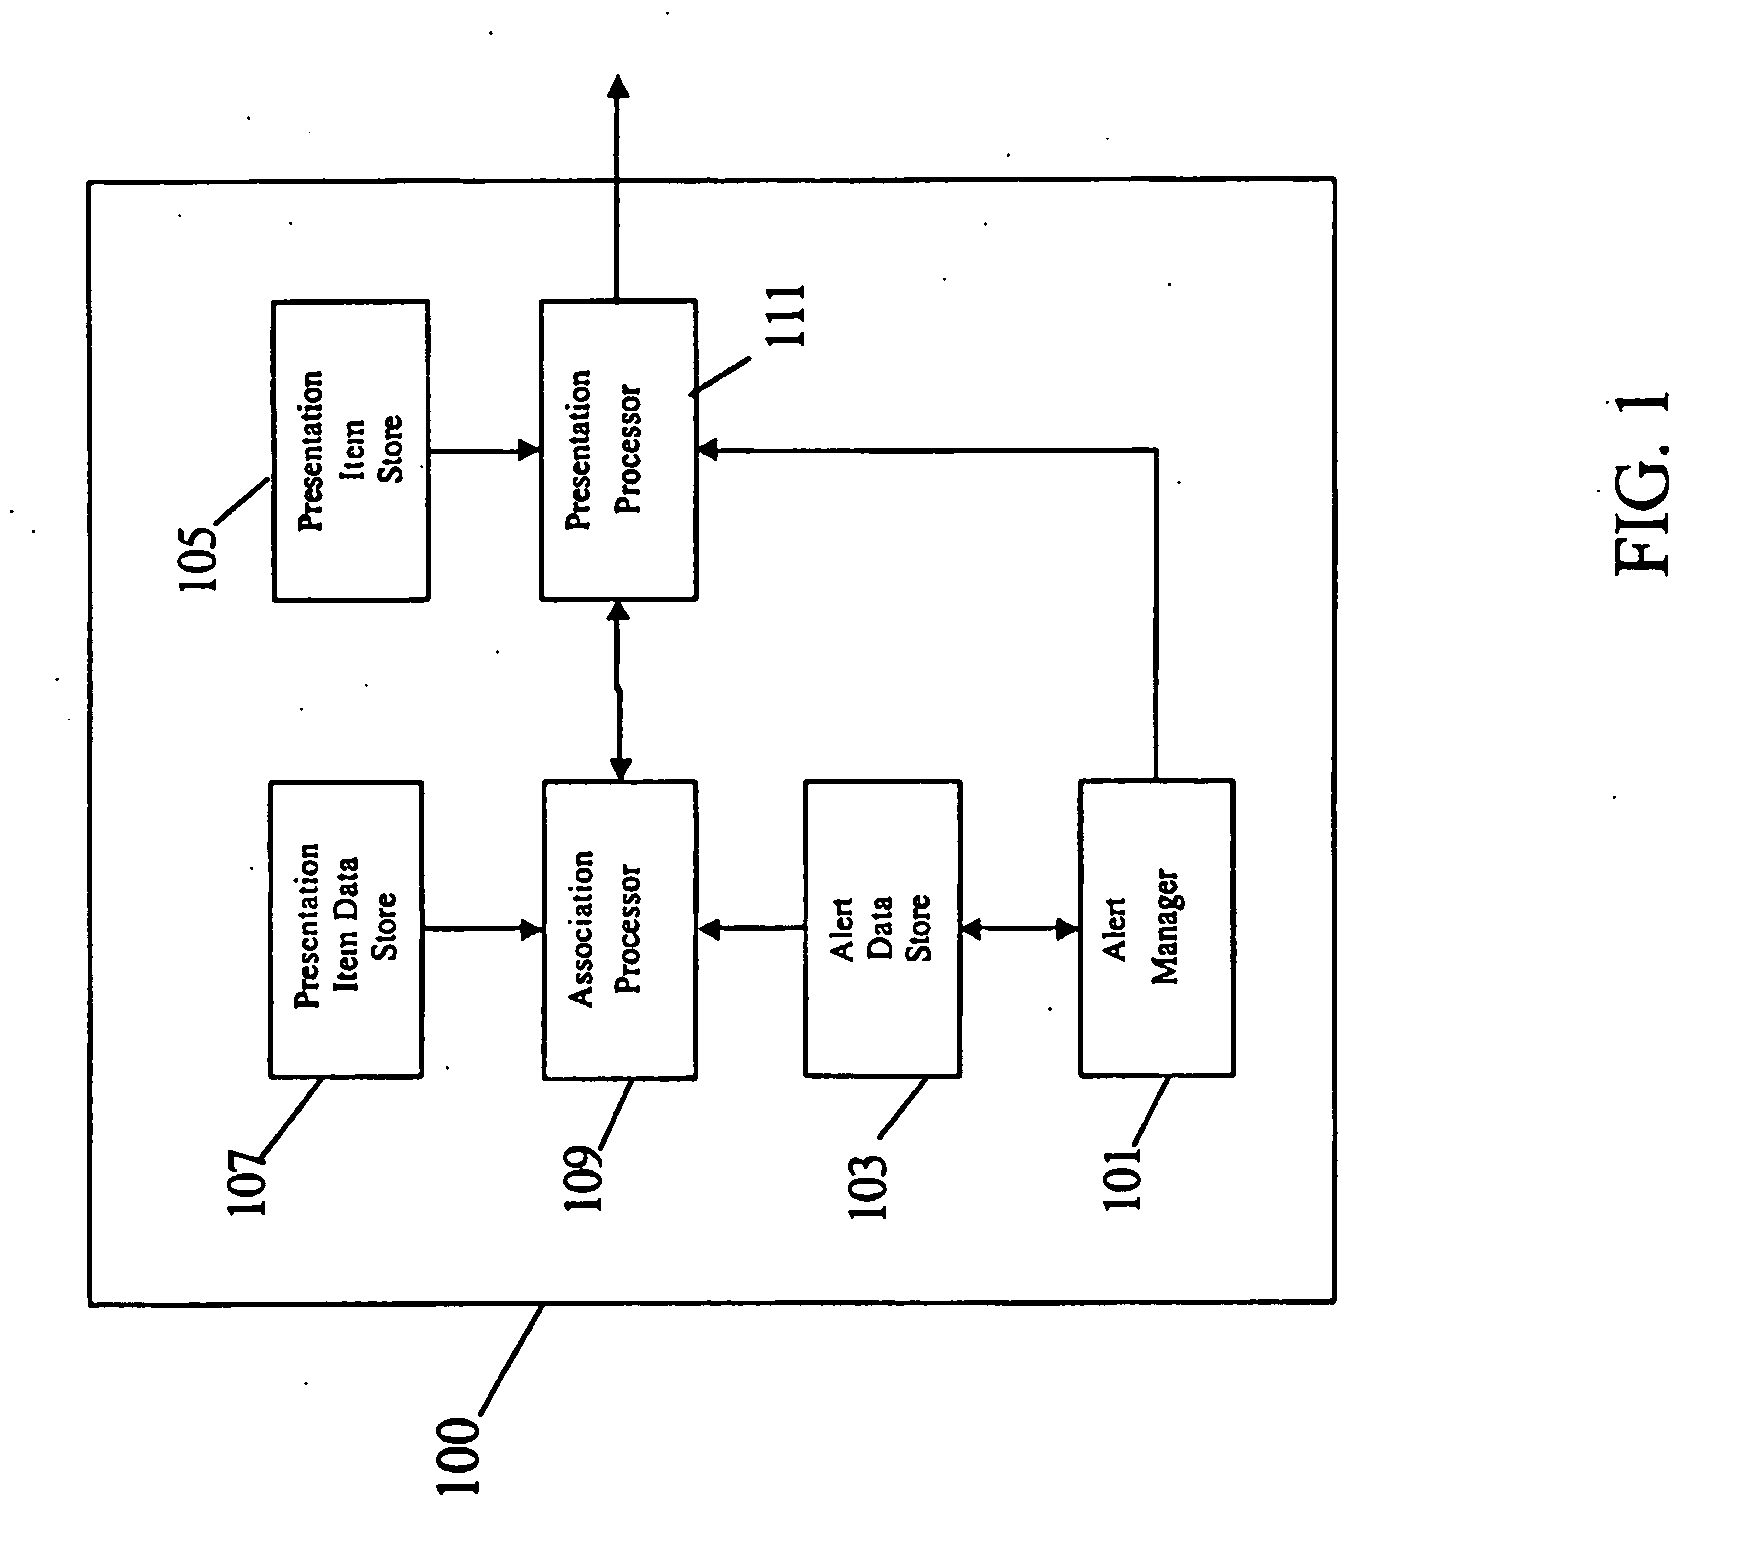 Alert management apparatus and a method of alert managment therefor